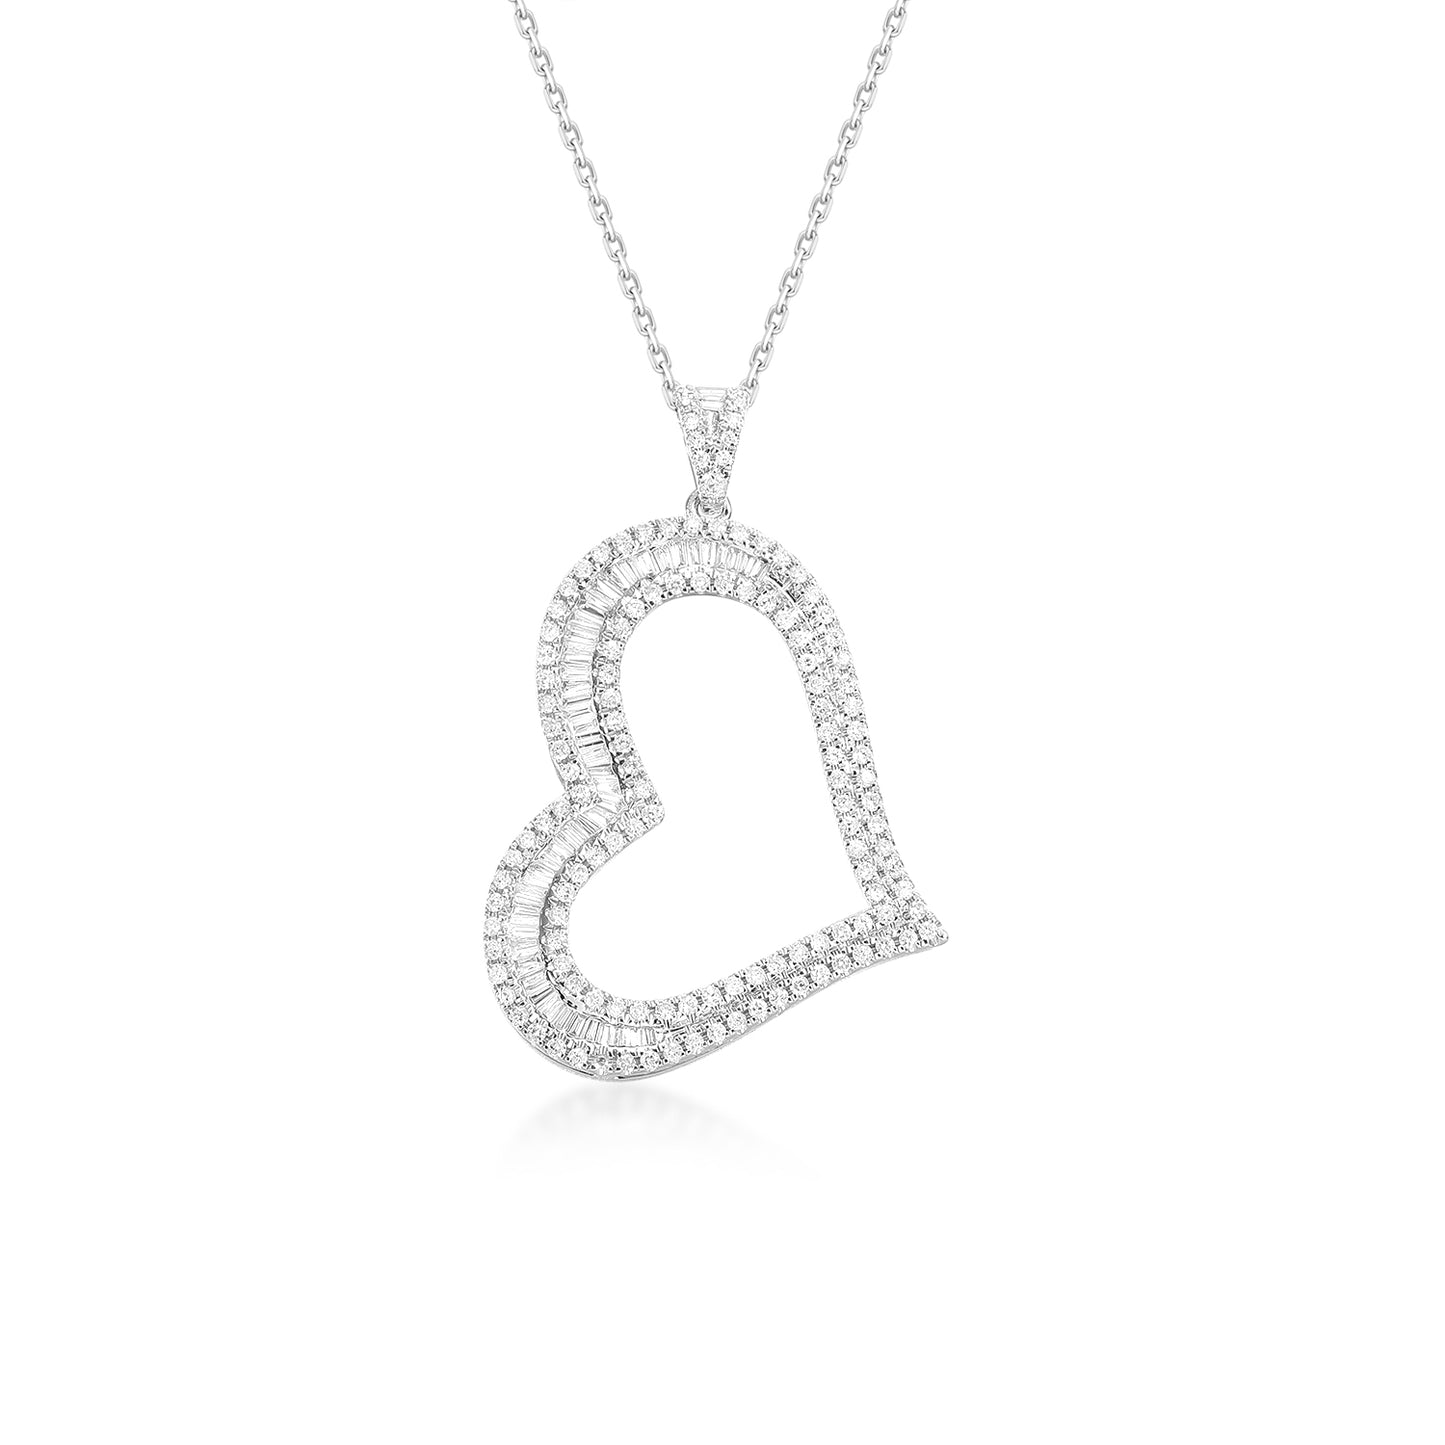 Diamond engagement necklace | Up 20% OFF